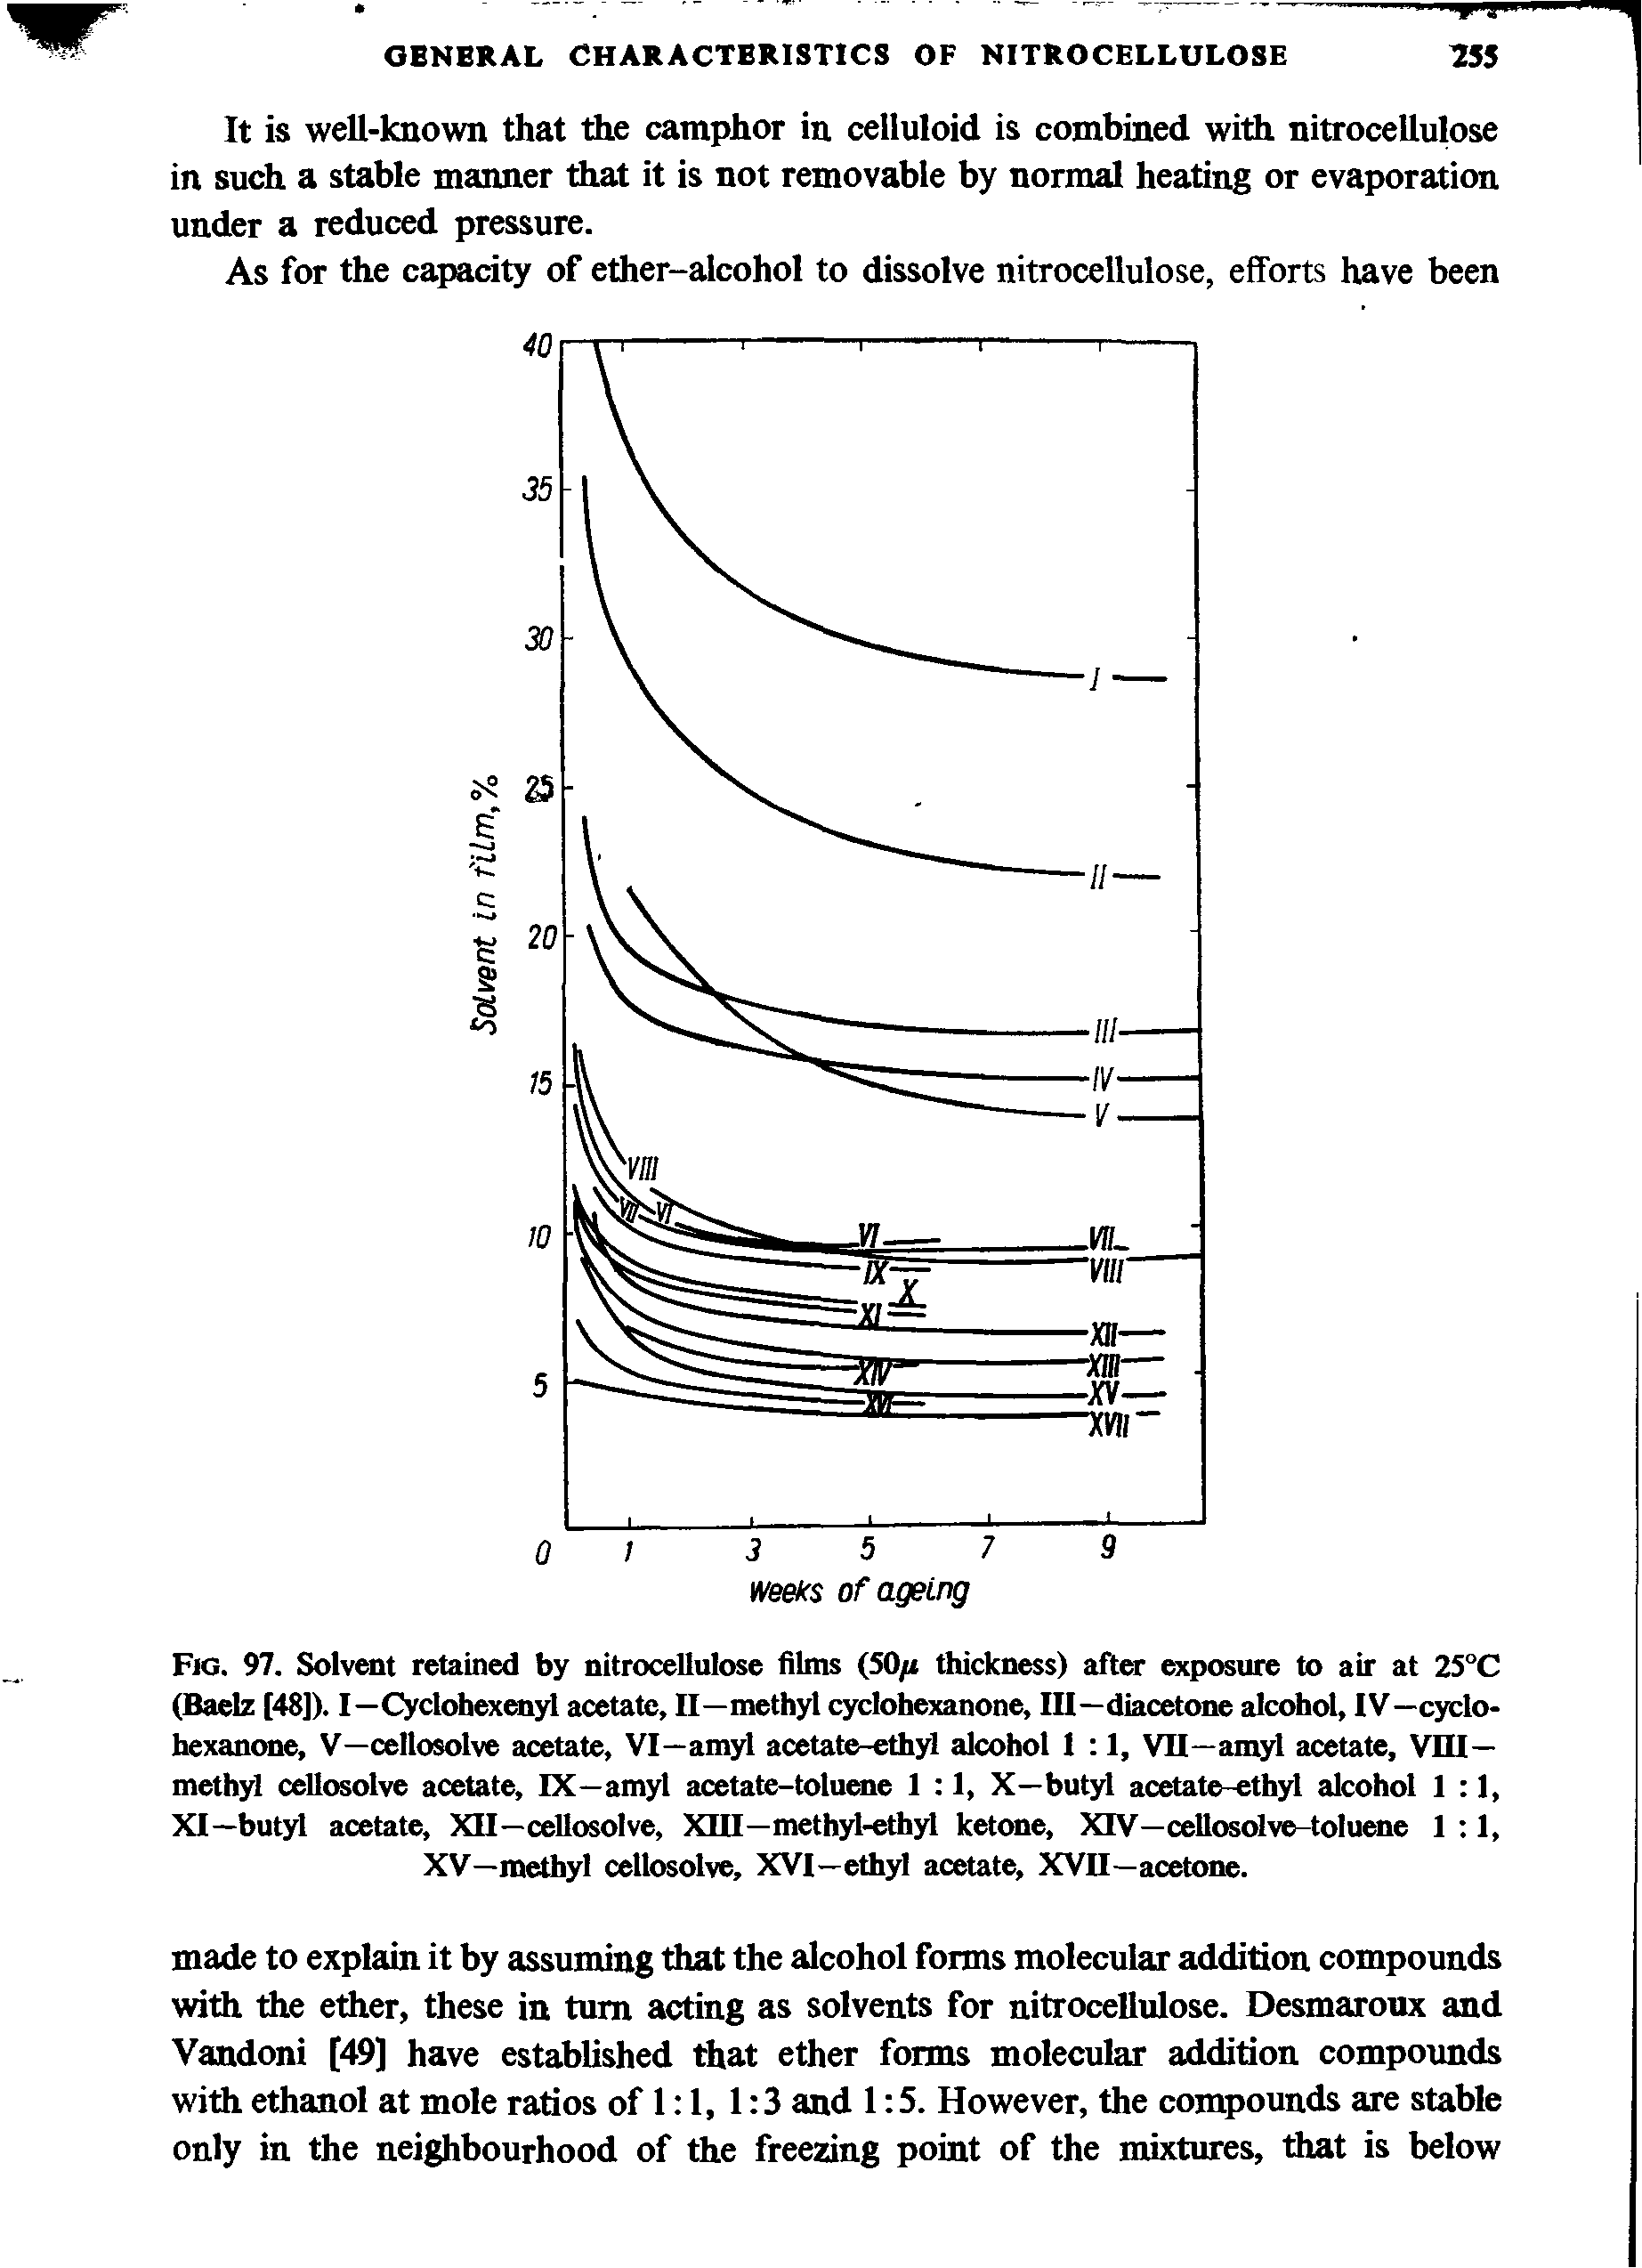 Fig. 97. Solvent retained by nitrocellulose films (50/i thickness) after exposure to air at 25°C (Baelz [48]). I—Cyclohexenyl acetate, II—methyl cyclohexanone, III—diacetone alcohol, IV—cyclohexanone, V—cellosolve acetate, VI—amyl acetate-ethyl alcohol I 1, VII—amyl acetate, VIII— methyl cellosolve acetate, IX—amyl acetate-toluene 1 1, X—butyl acetate-ethyl alcohol 1 1, XI—butyl acetate, XII—cellosolve, XIII—methyl-ethyl ketone, XIV—cellosolve-toluene 1 1, XV—methyl cellosolve, XVI—ethyl acetate, XVII—acetone.